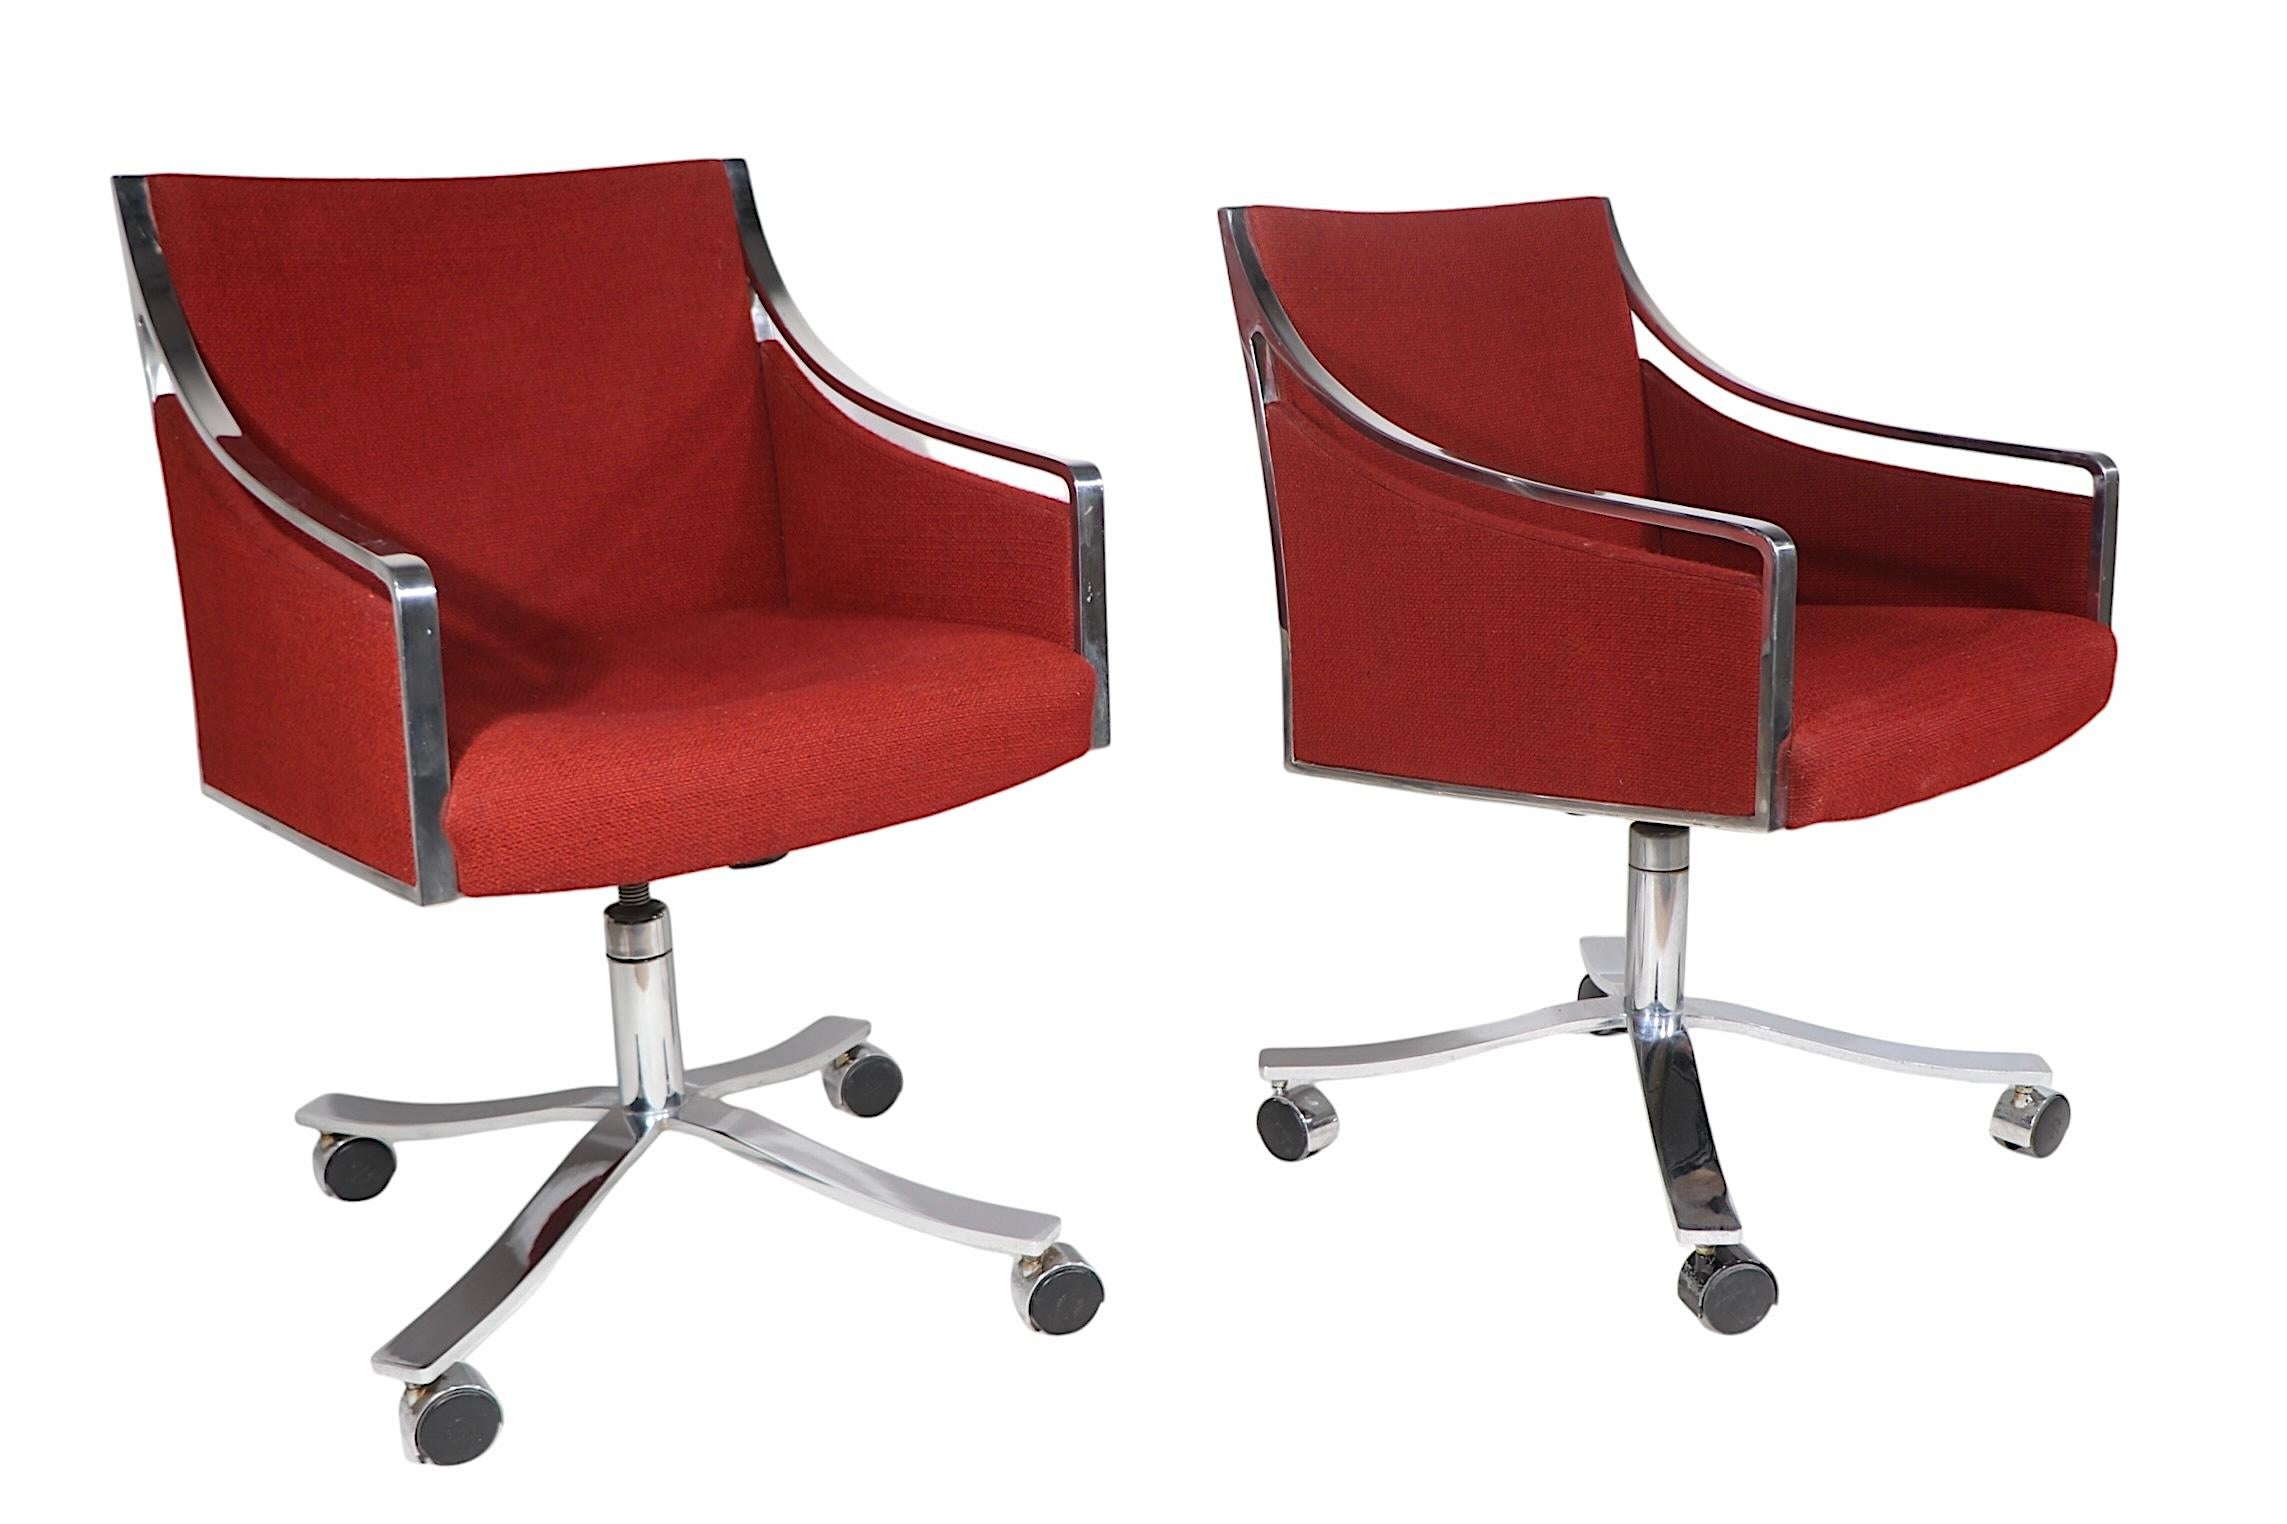 20th Century Bert England for Stow Davis Swivel Desk Chairs c 1970's  pair available For Sale